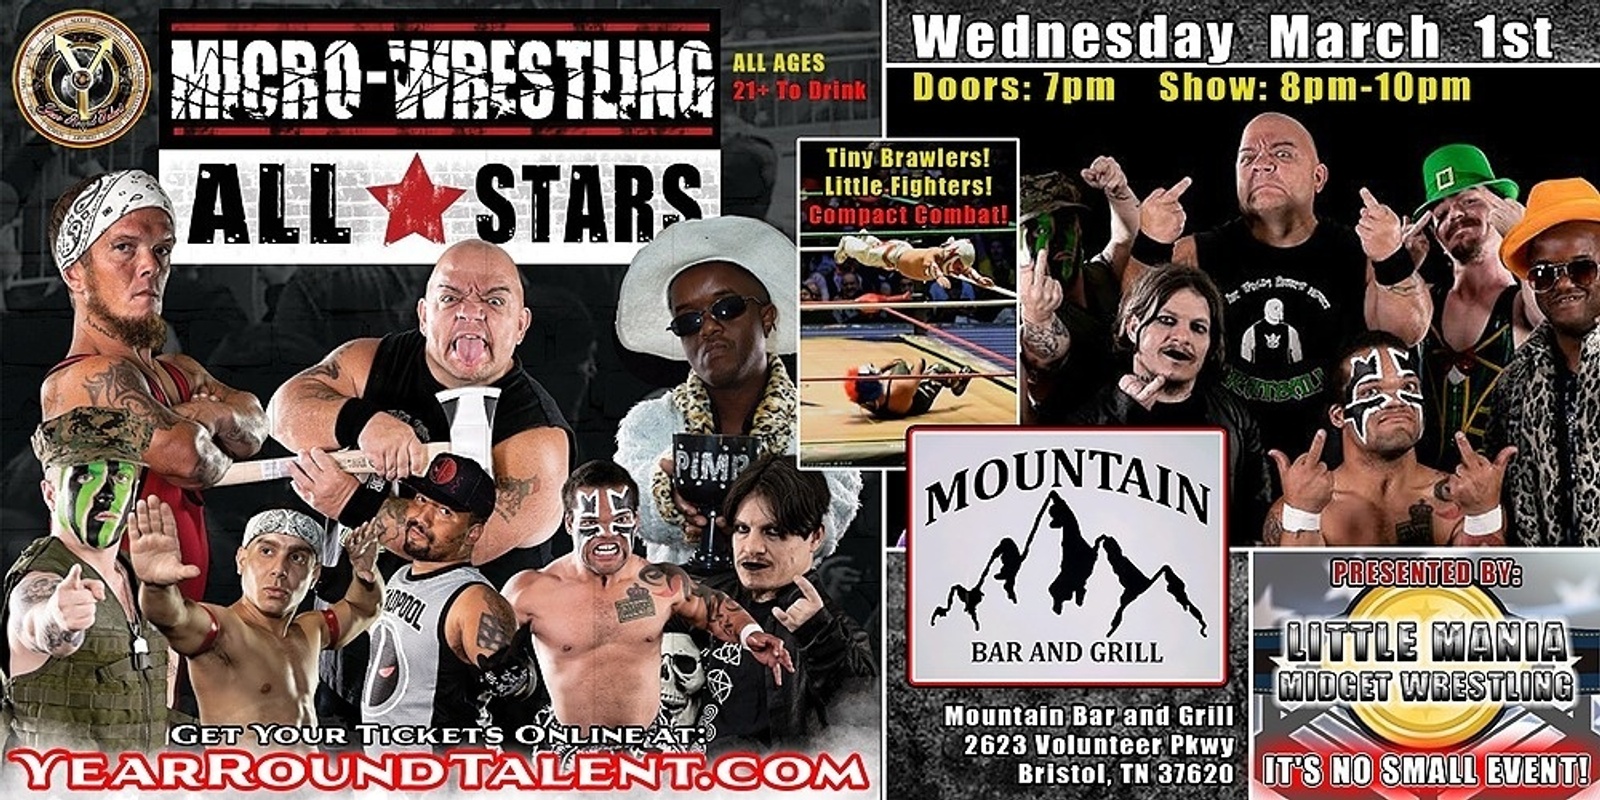 Banner image for Bristol, TN - Micro-Wresting All * Stars: Little Mania Rips Through the Ring!